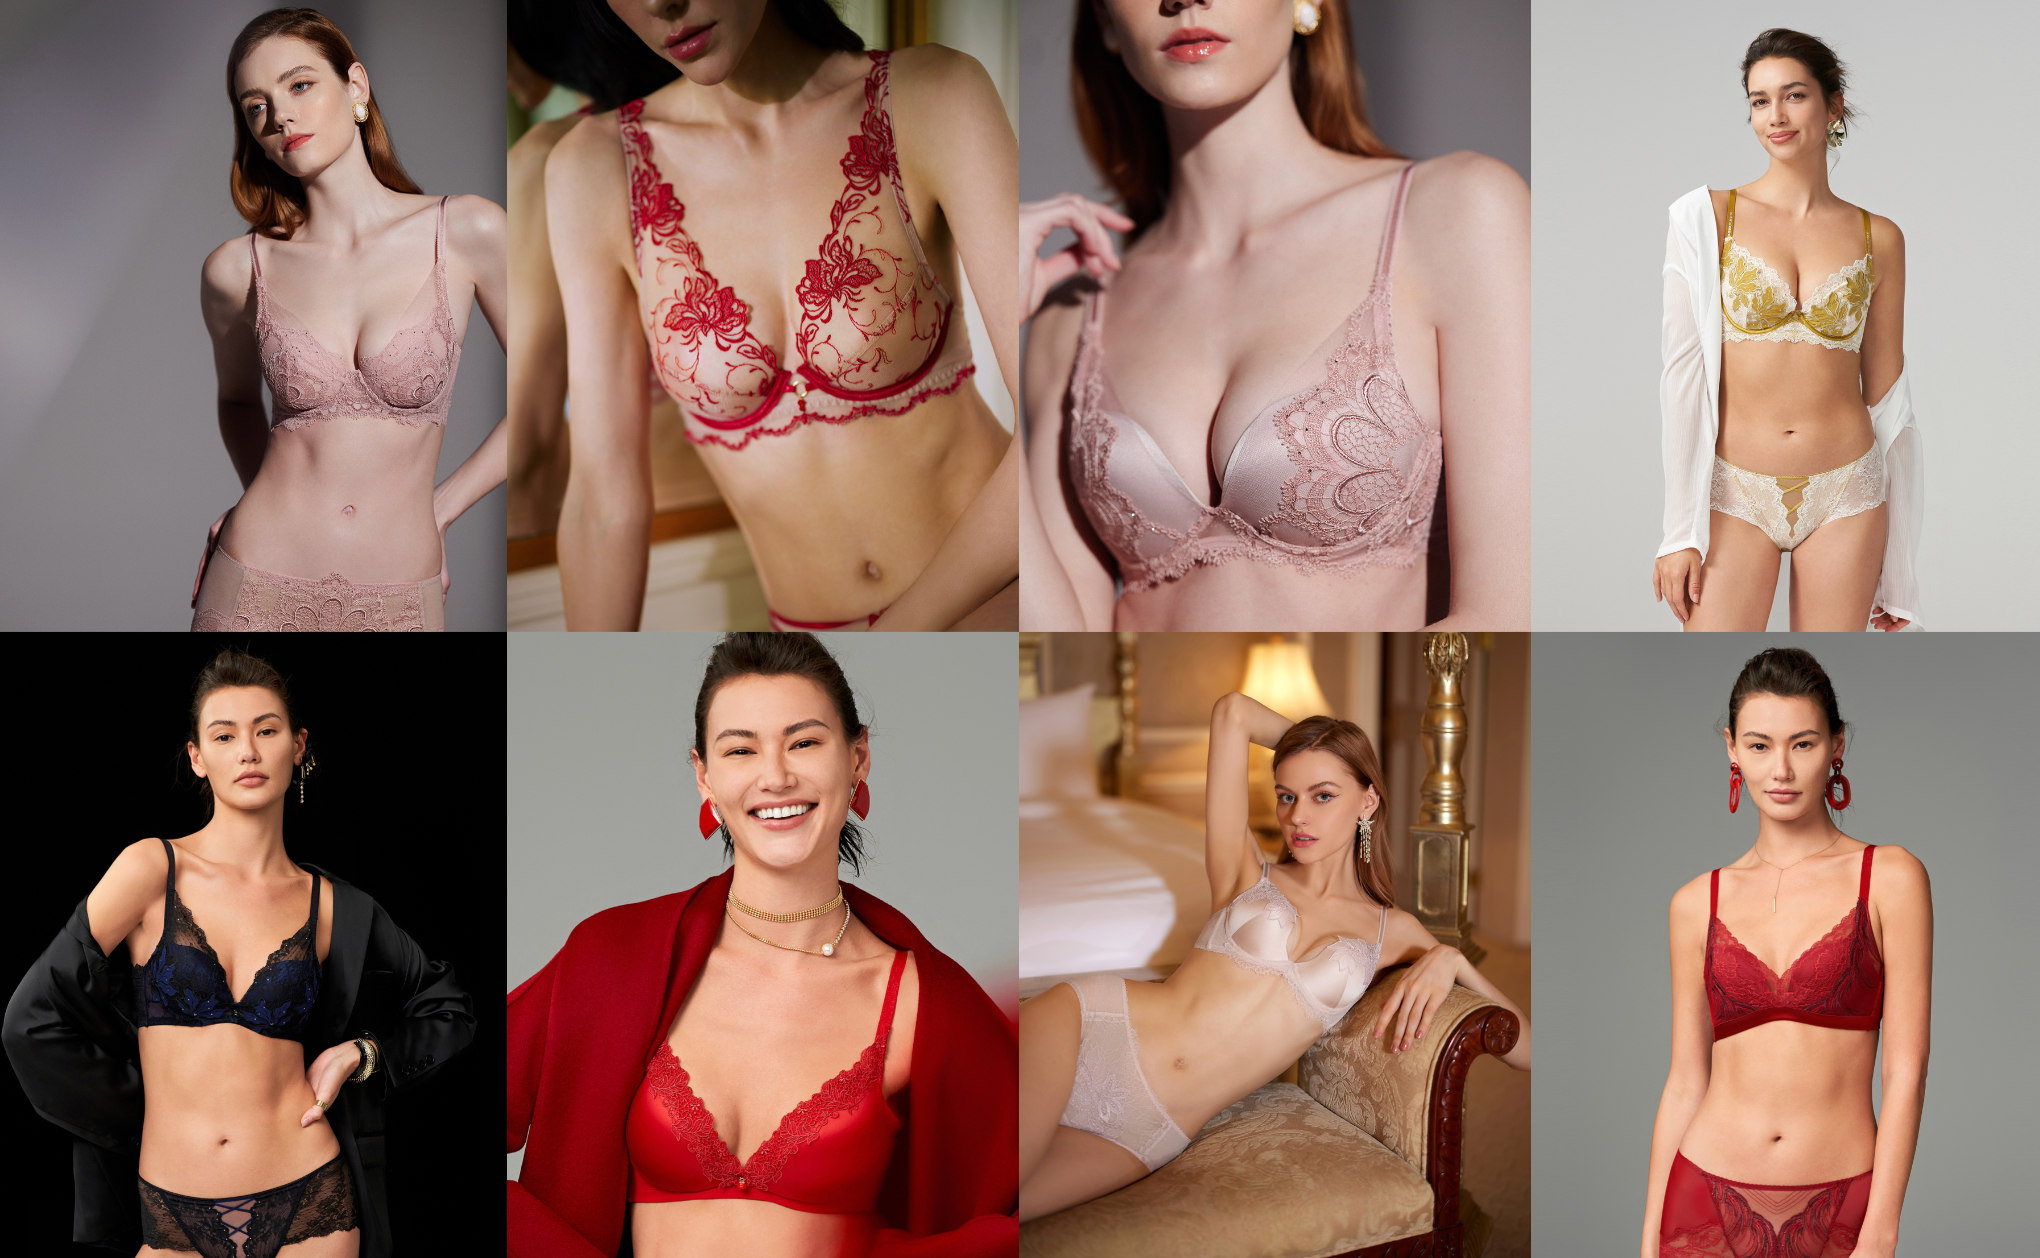 Leading a more mature and sophisticated image in China’s lingerie market, Aimer has expanded its product offerings over the past few decades since first launching in 1993. Image: Aimer